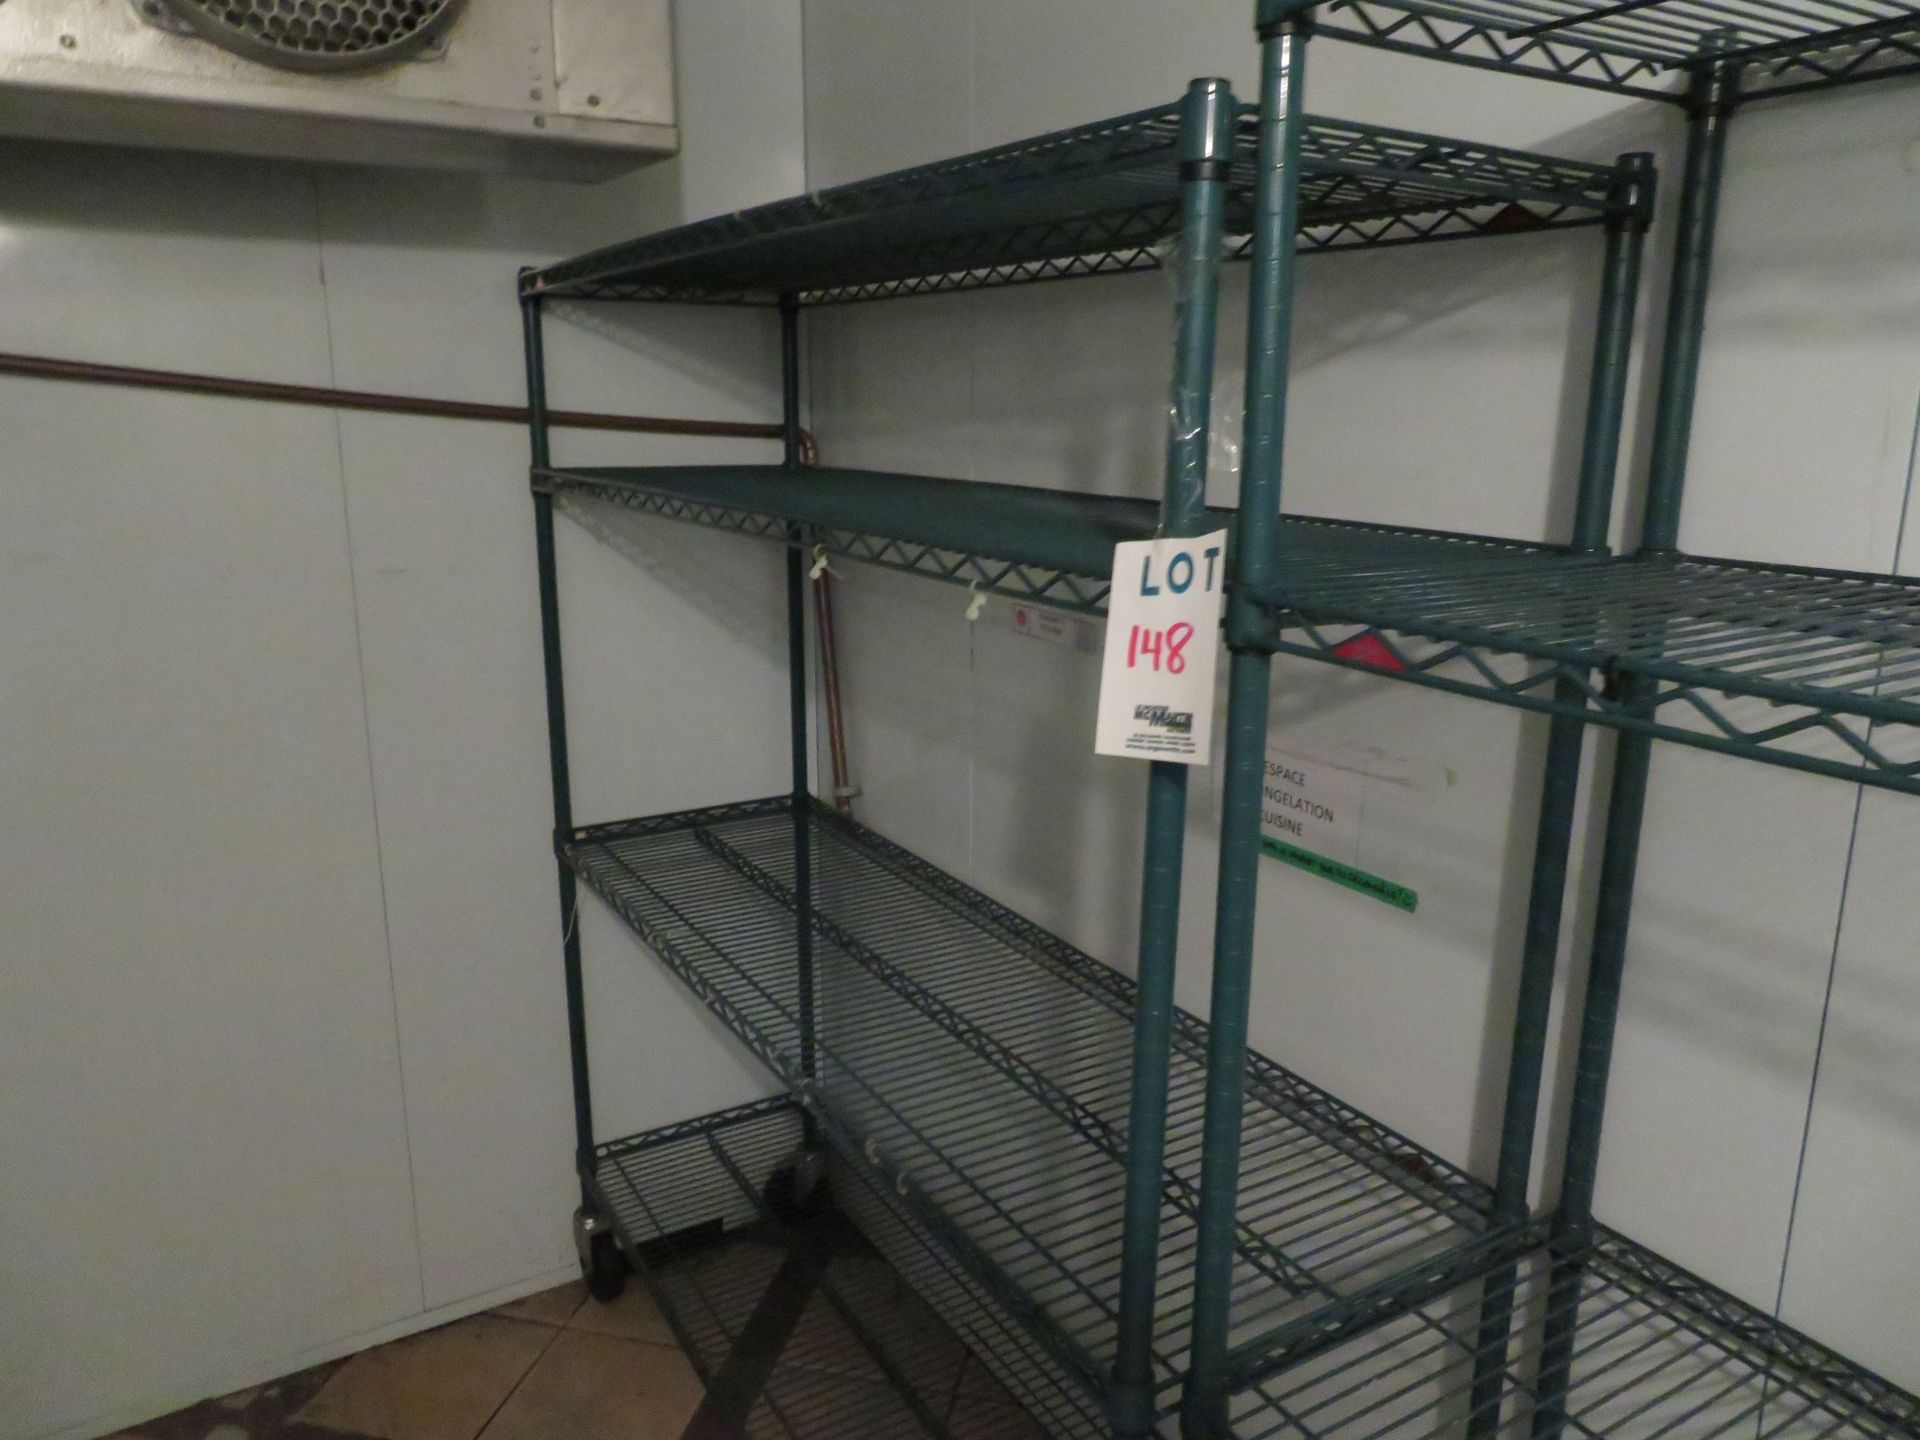 Stainless steel shelving on wheels approx. 60"w x 18"d x 68"h